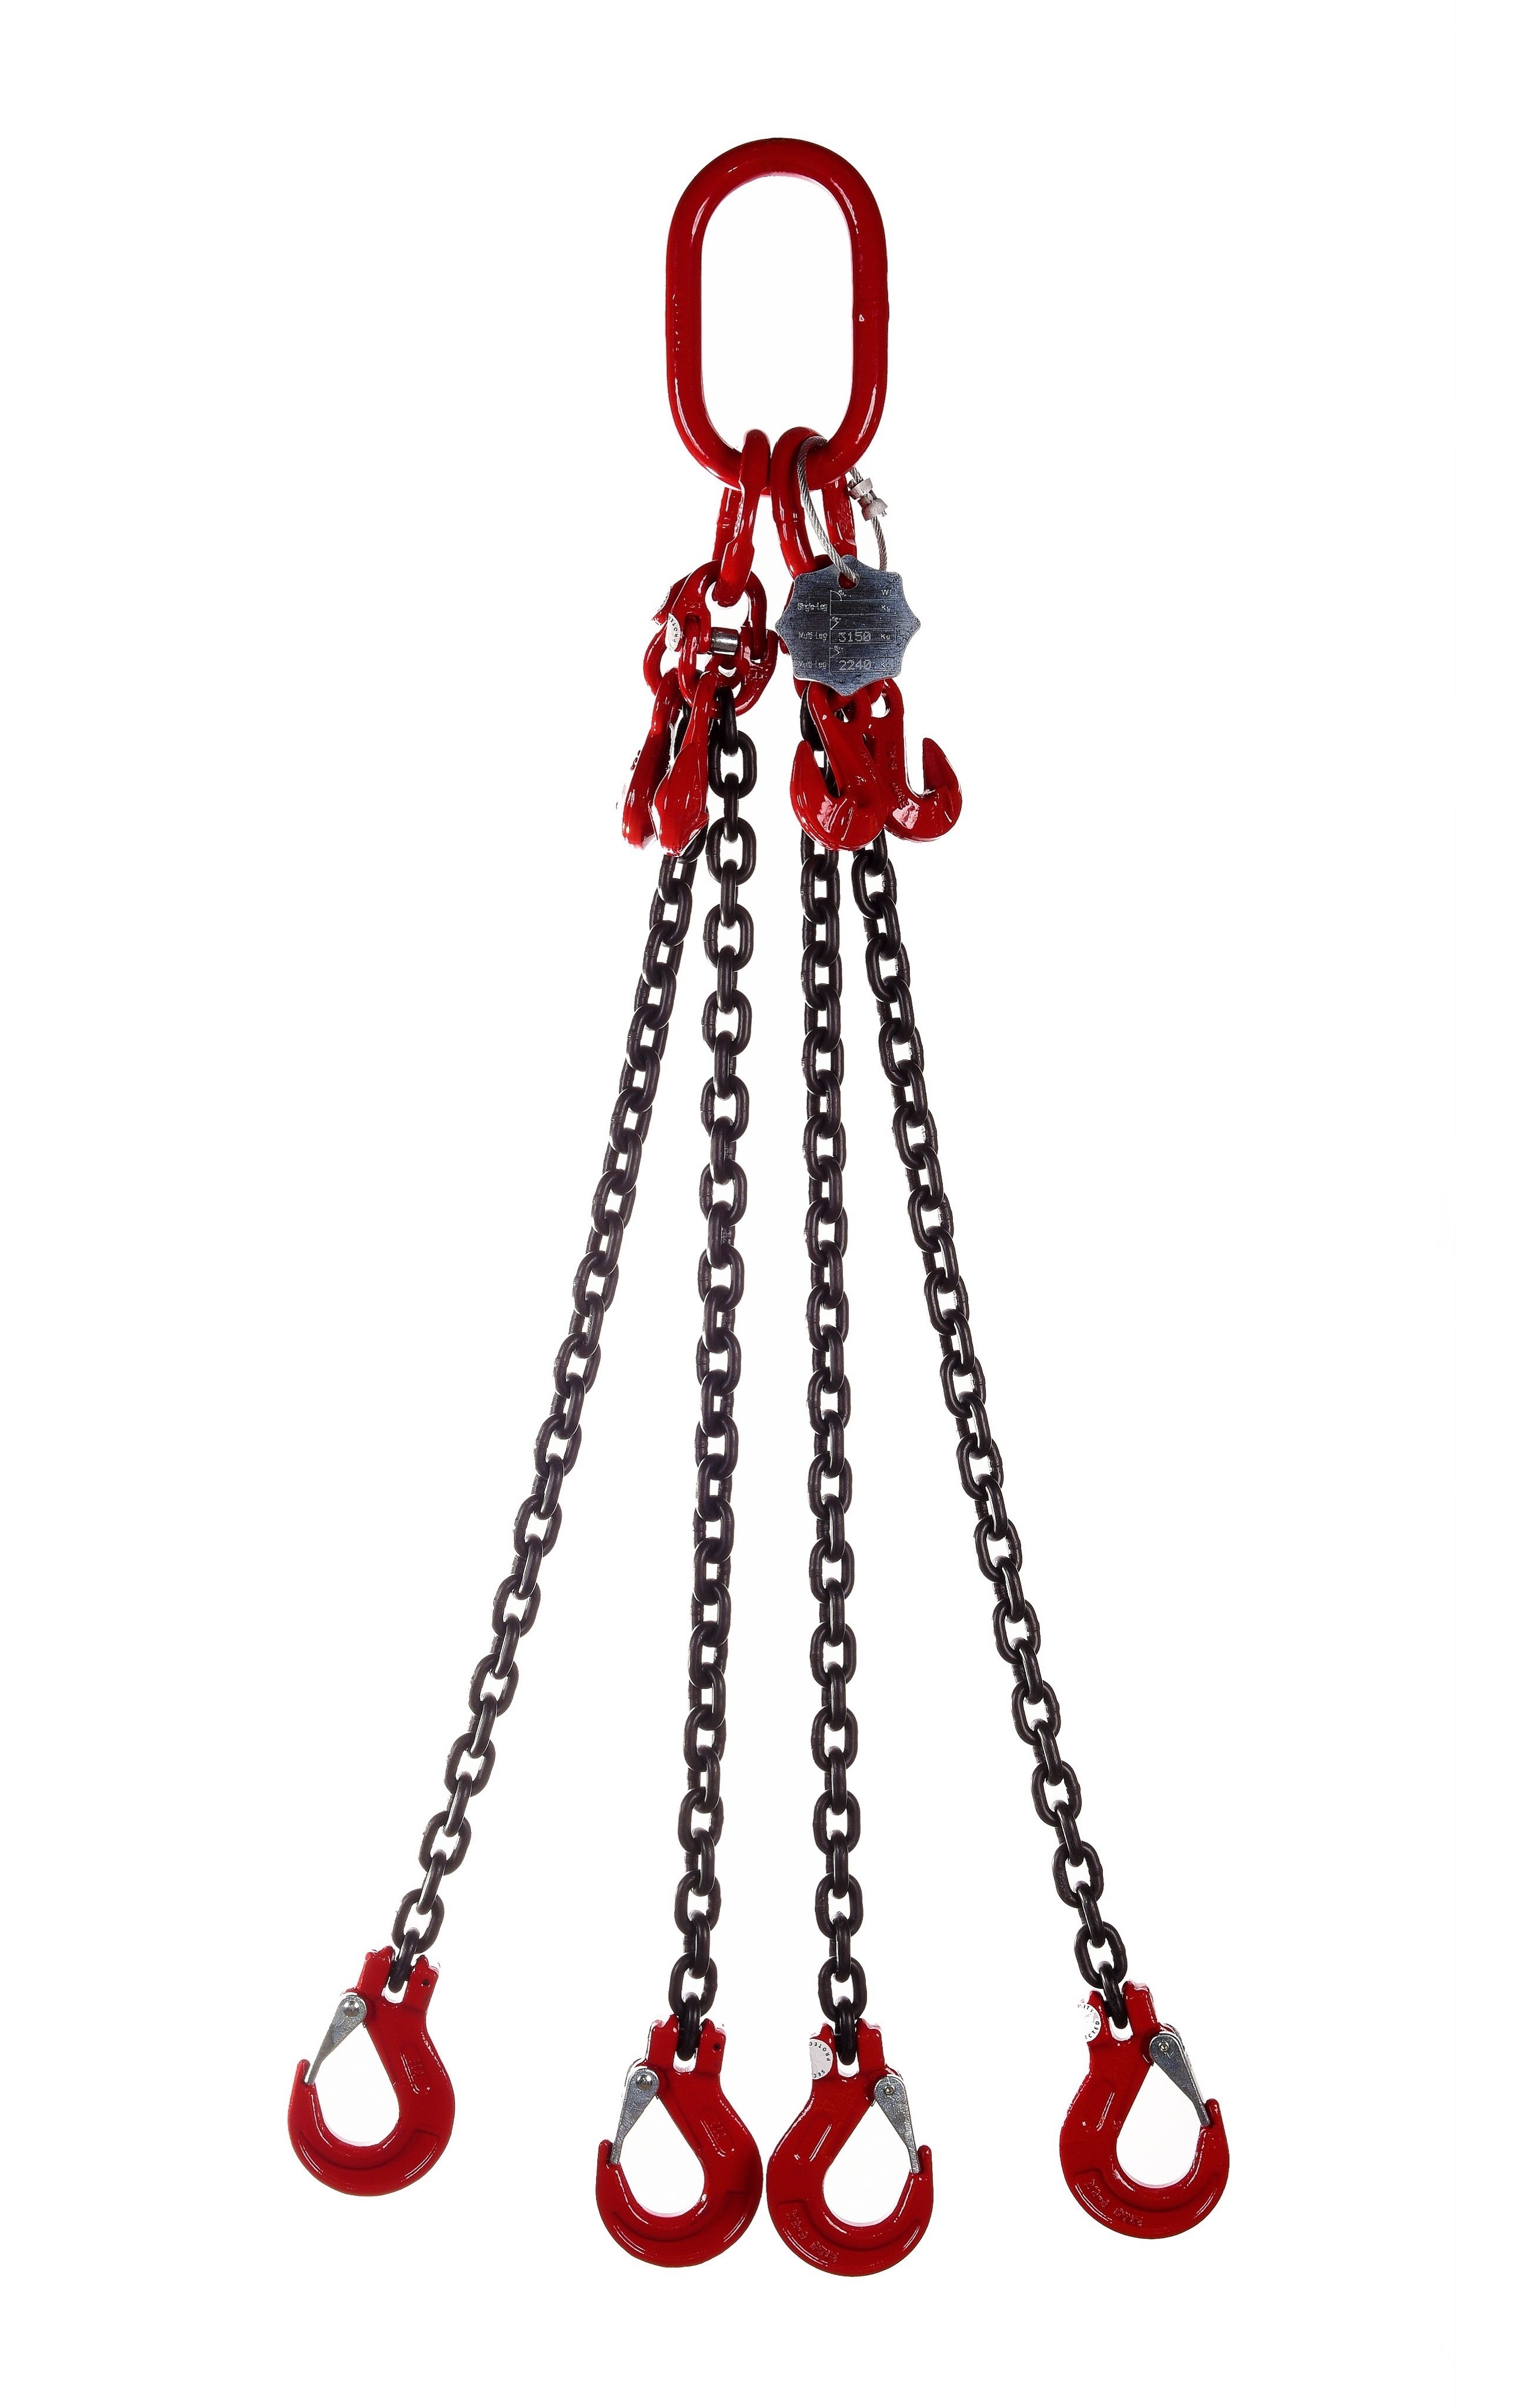 4 Leg 23.6tonne 19mm Lifting Chain Sling with choice of length and hooks – With Shortening Hook – 3mtr – Clevis Sling Hook – Chain Slings – WSB